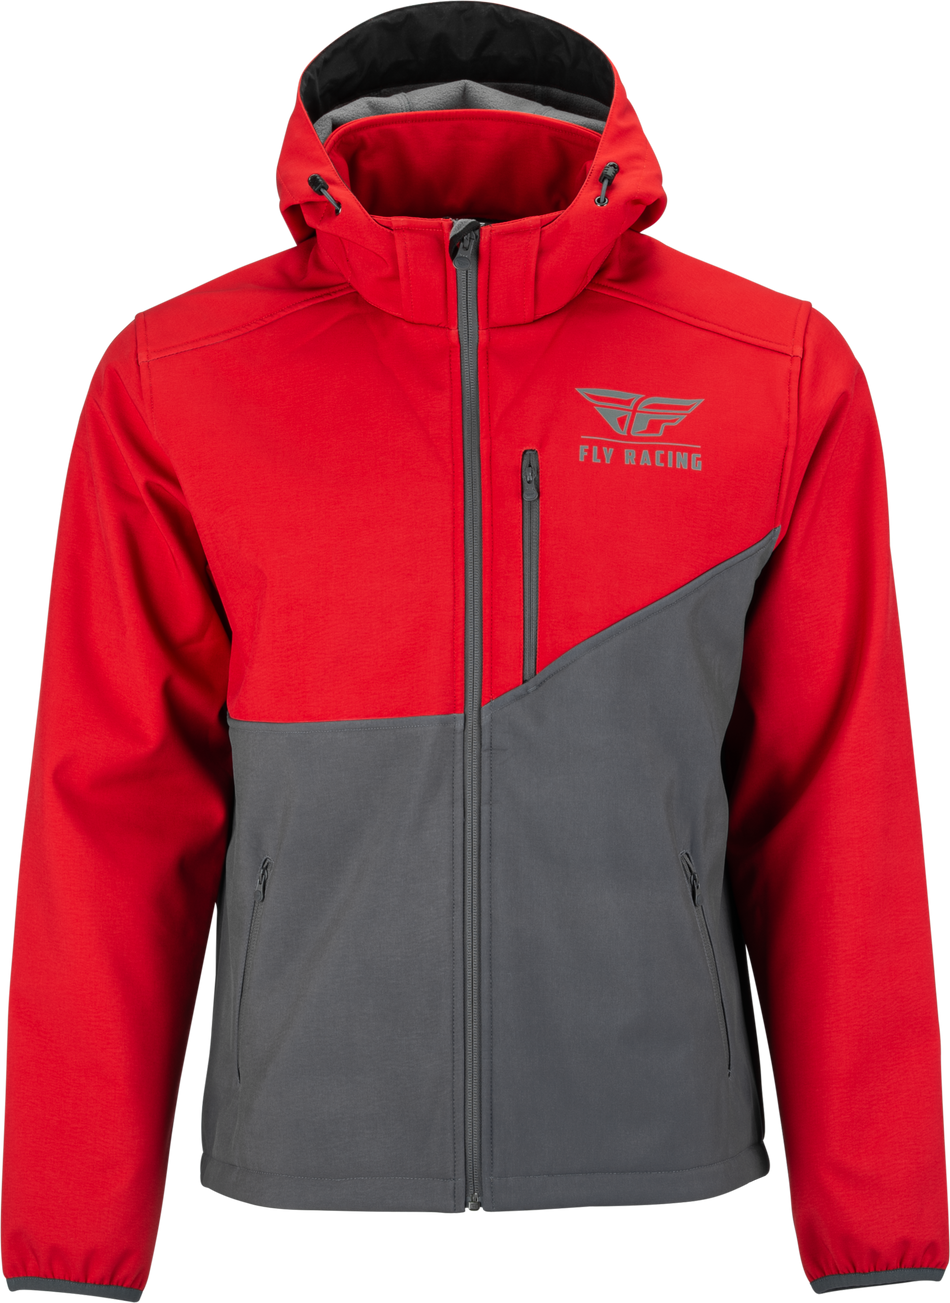 FLY RACING Checkpoint Jacket Grey/Red Lg 354-6384L